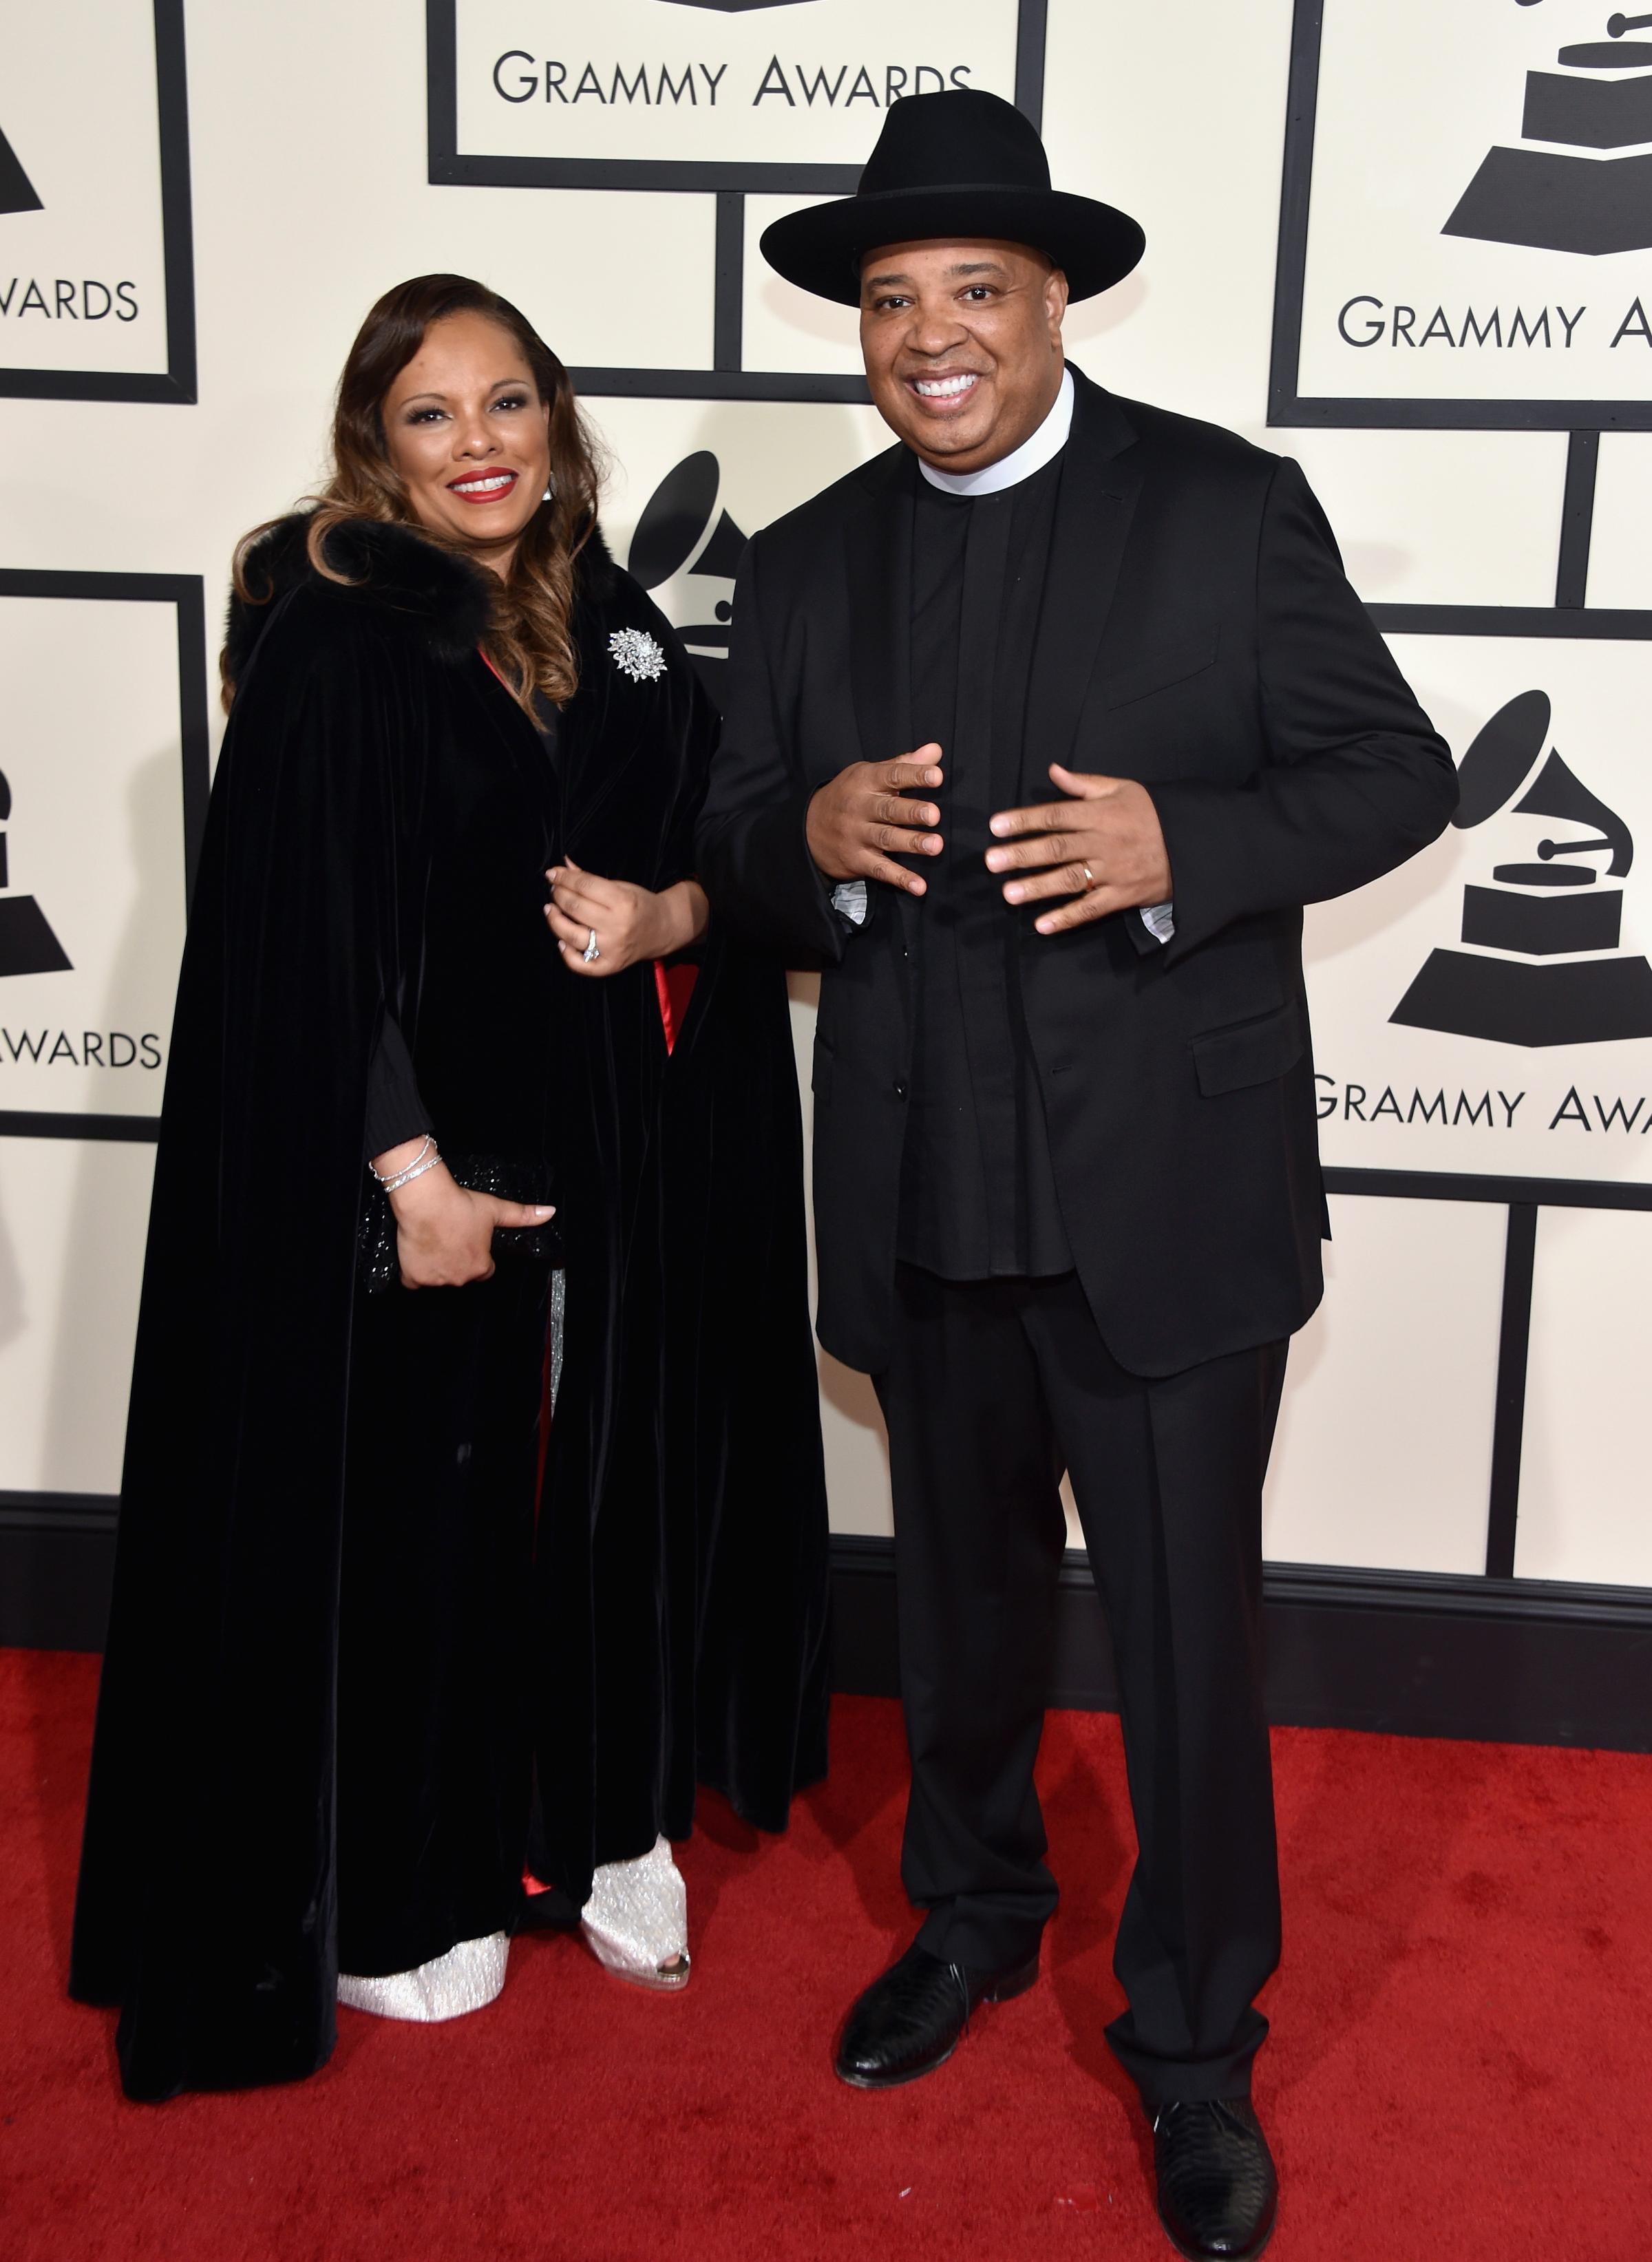 Justine Simmons, left, and Joseph "Rev Run," right, attend the 58th GRAMMY Awards at Staples Center on Feb. 15, 2016 in Los Angeles.